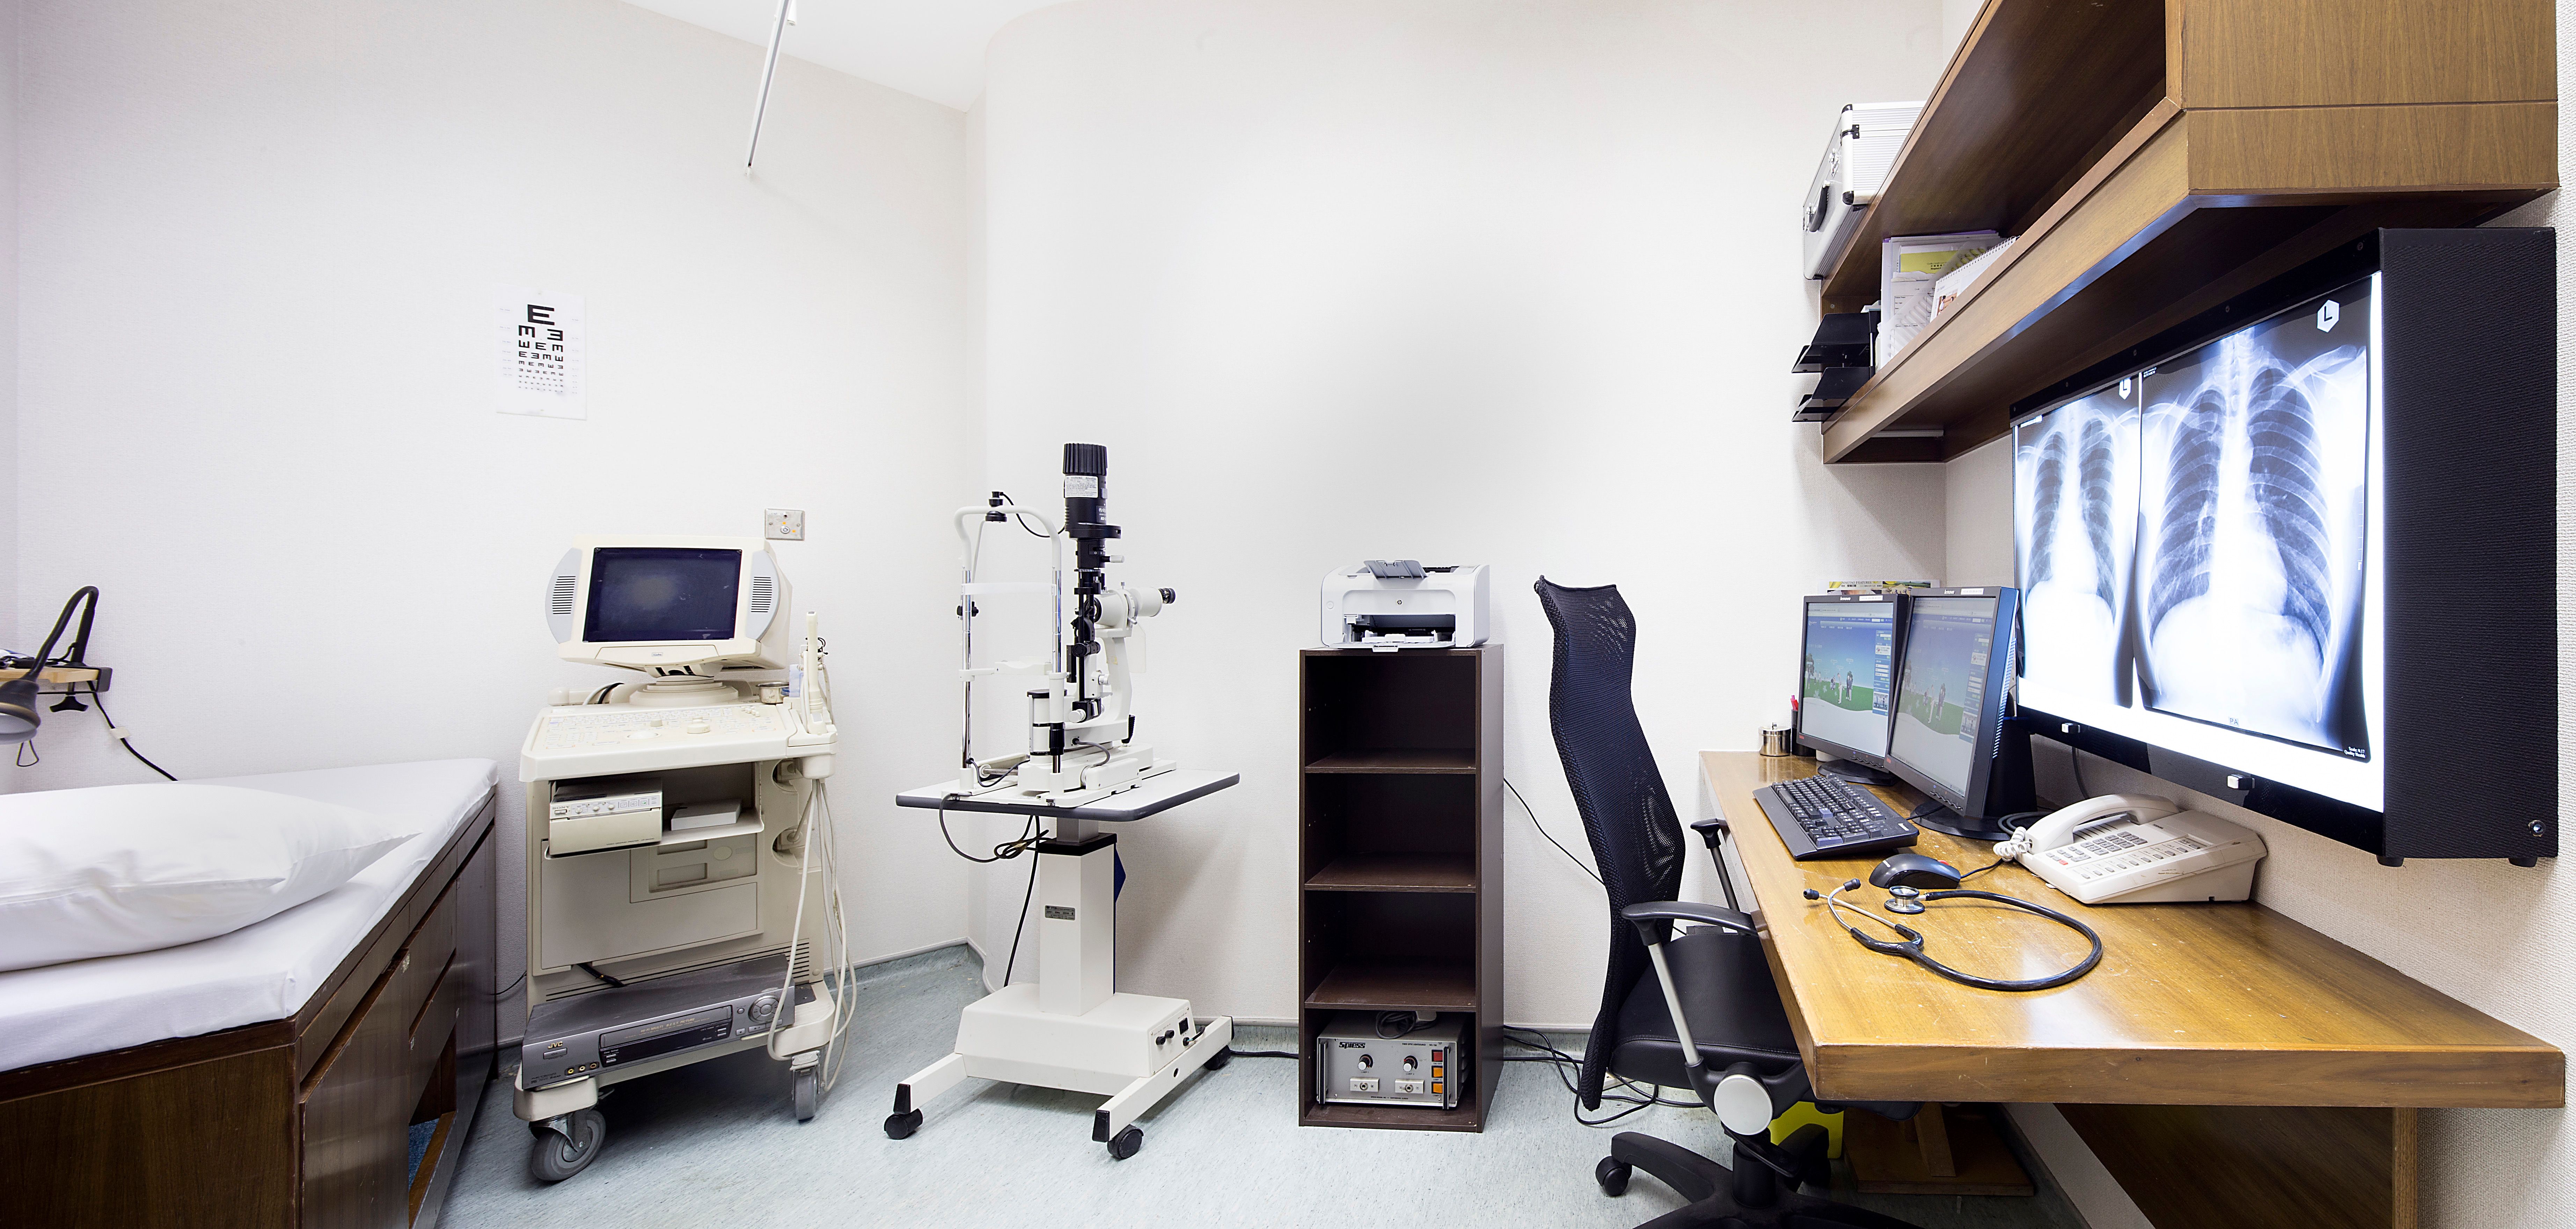 Examination room with patient bed, medical equipment, desk and X-rays